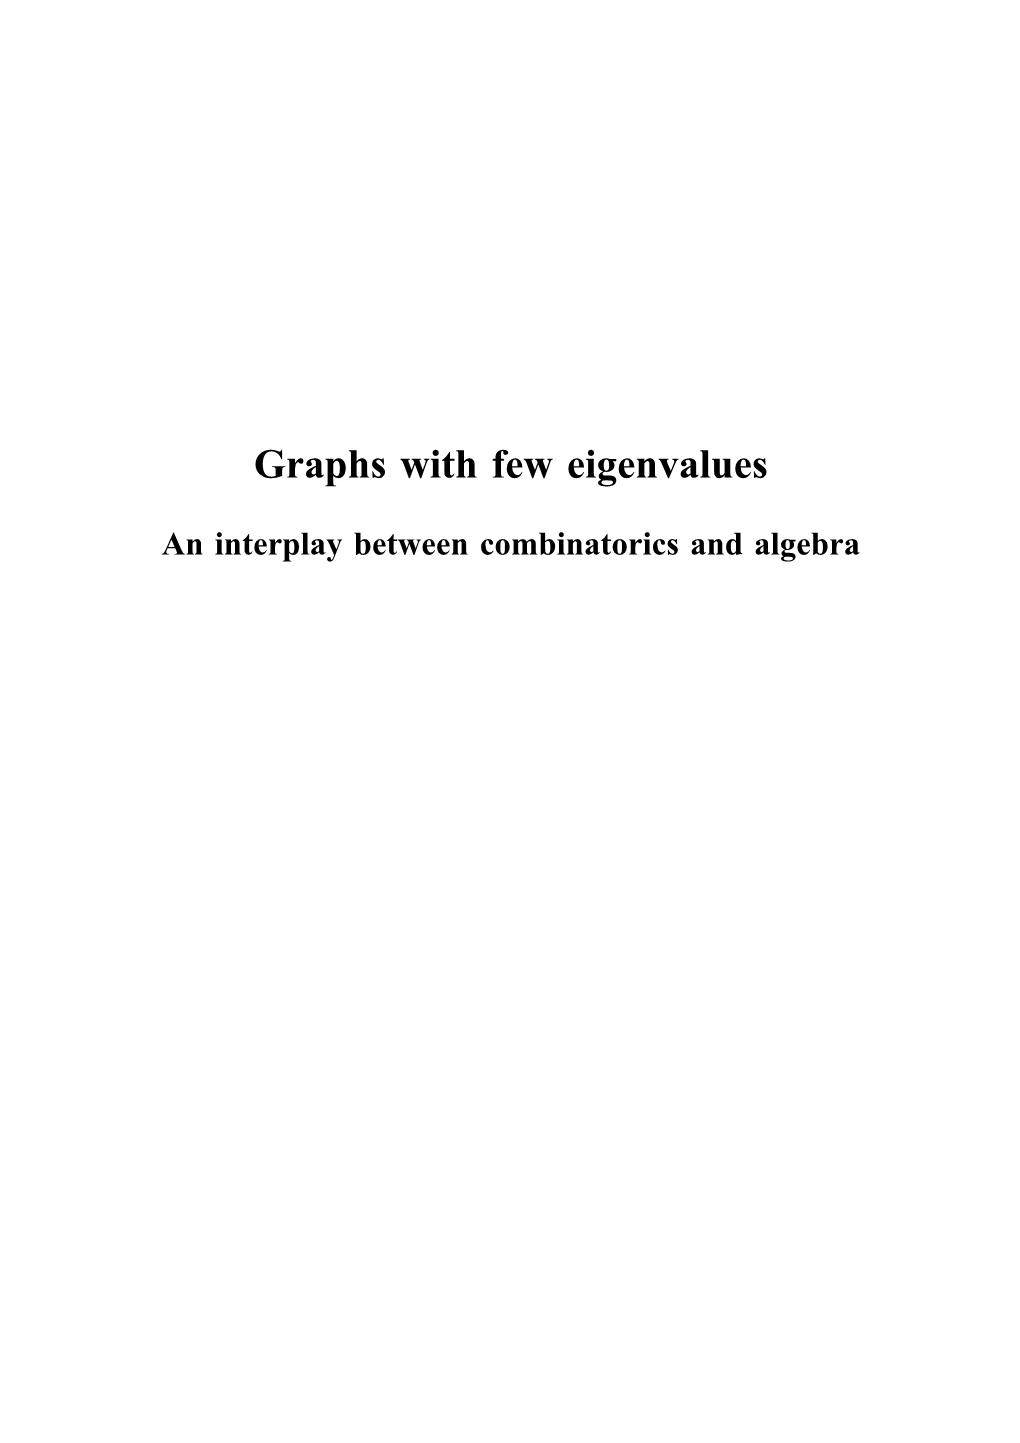 Graphs with Few Eigenvalues